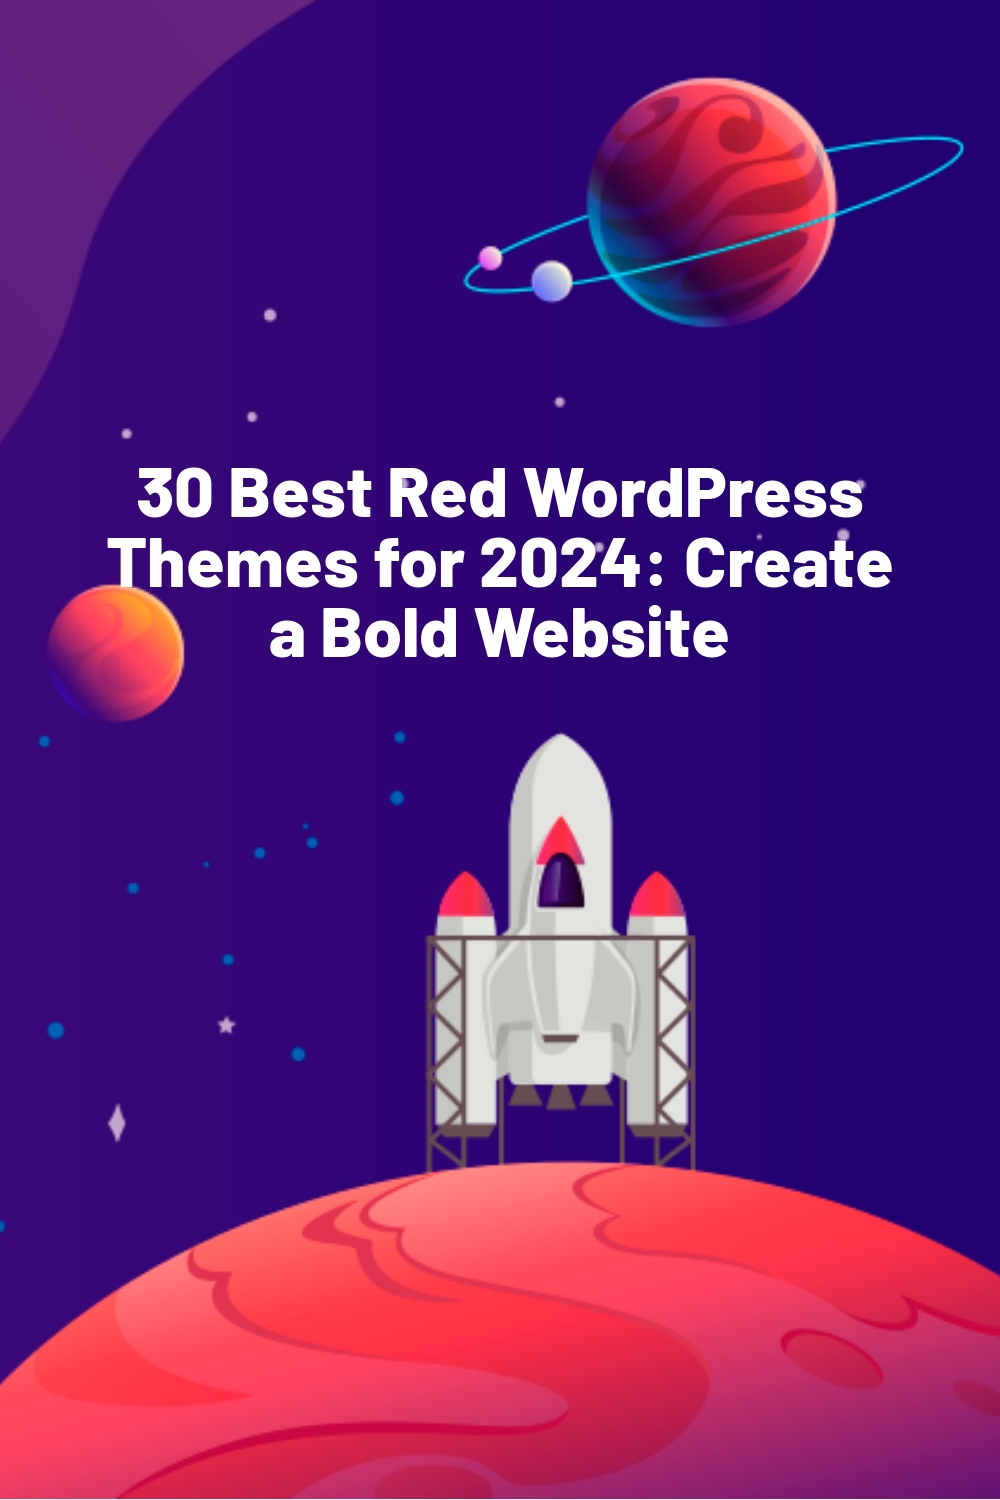 30 Best Red WordPress Themes for 2024: Create a Bold Website